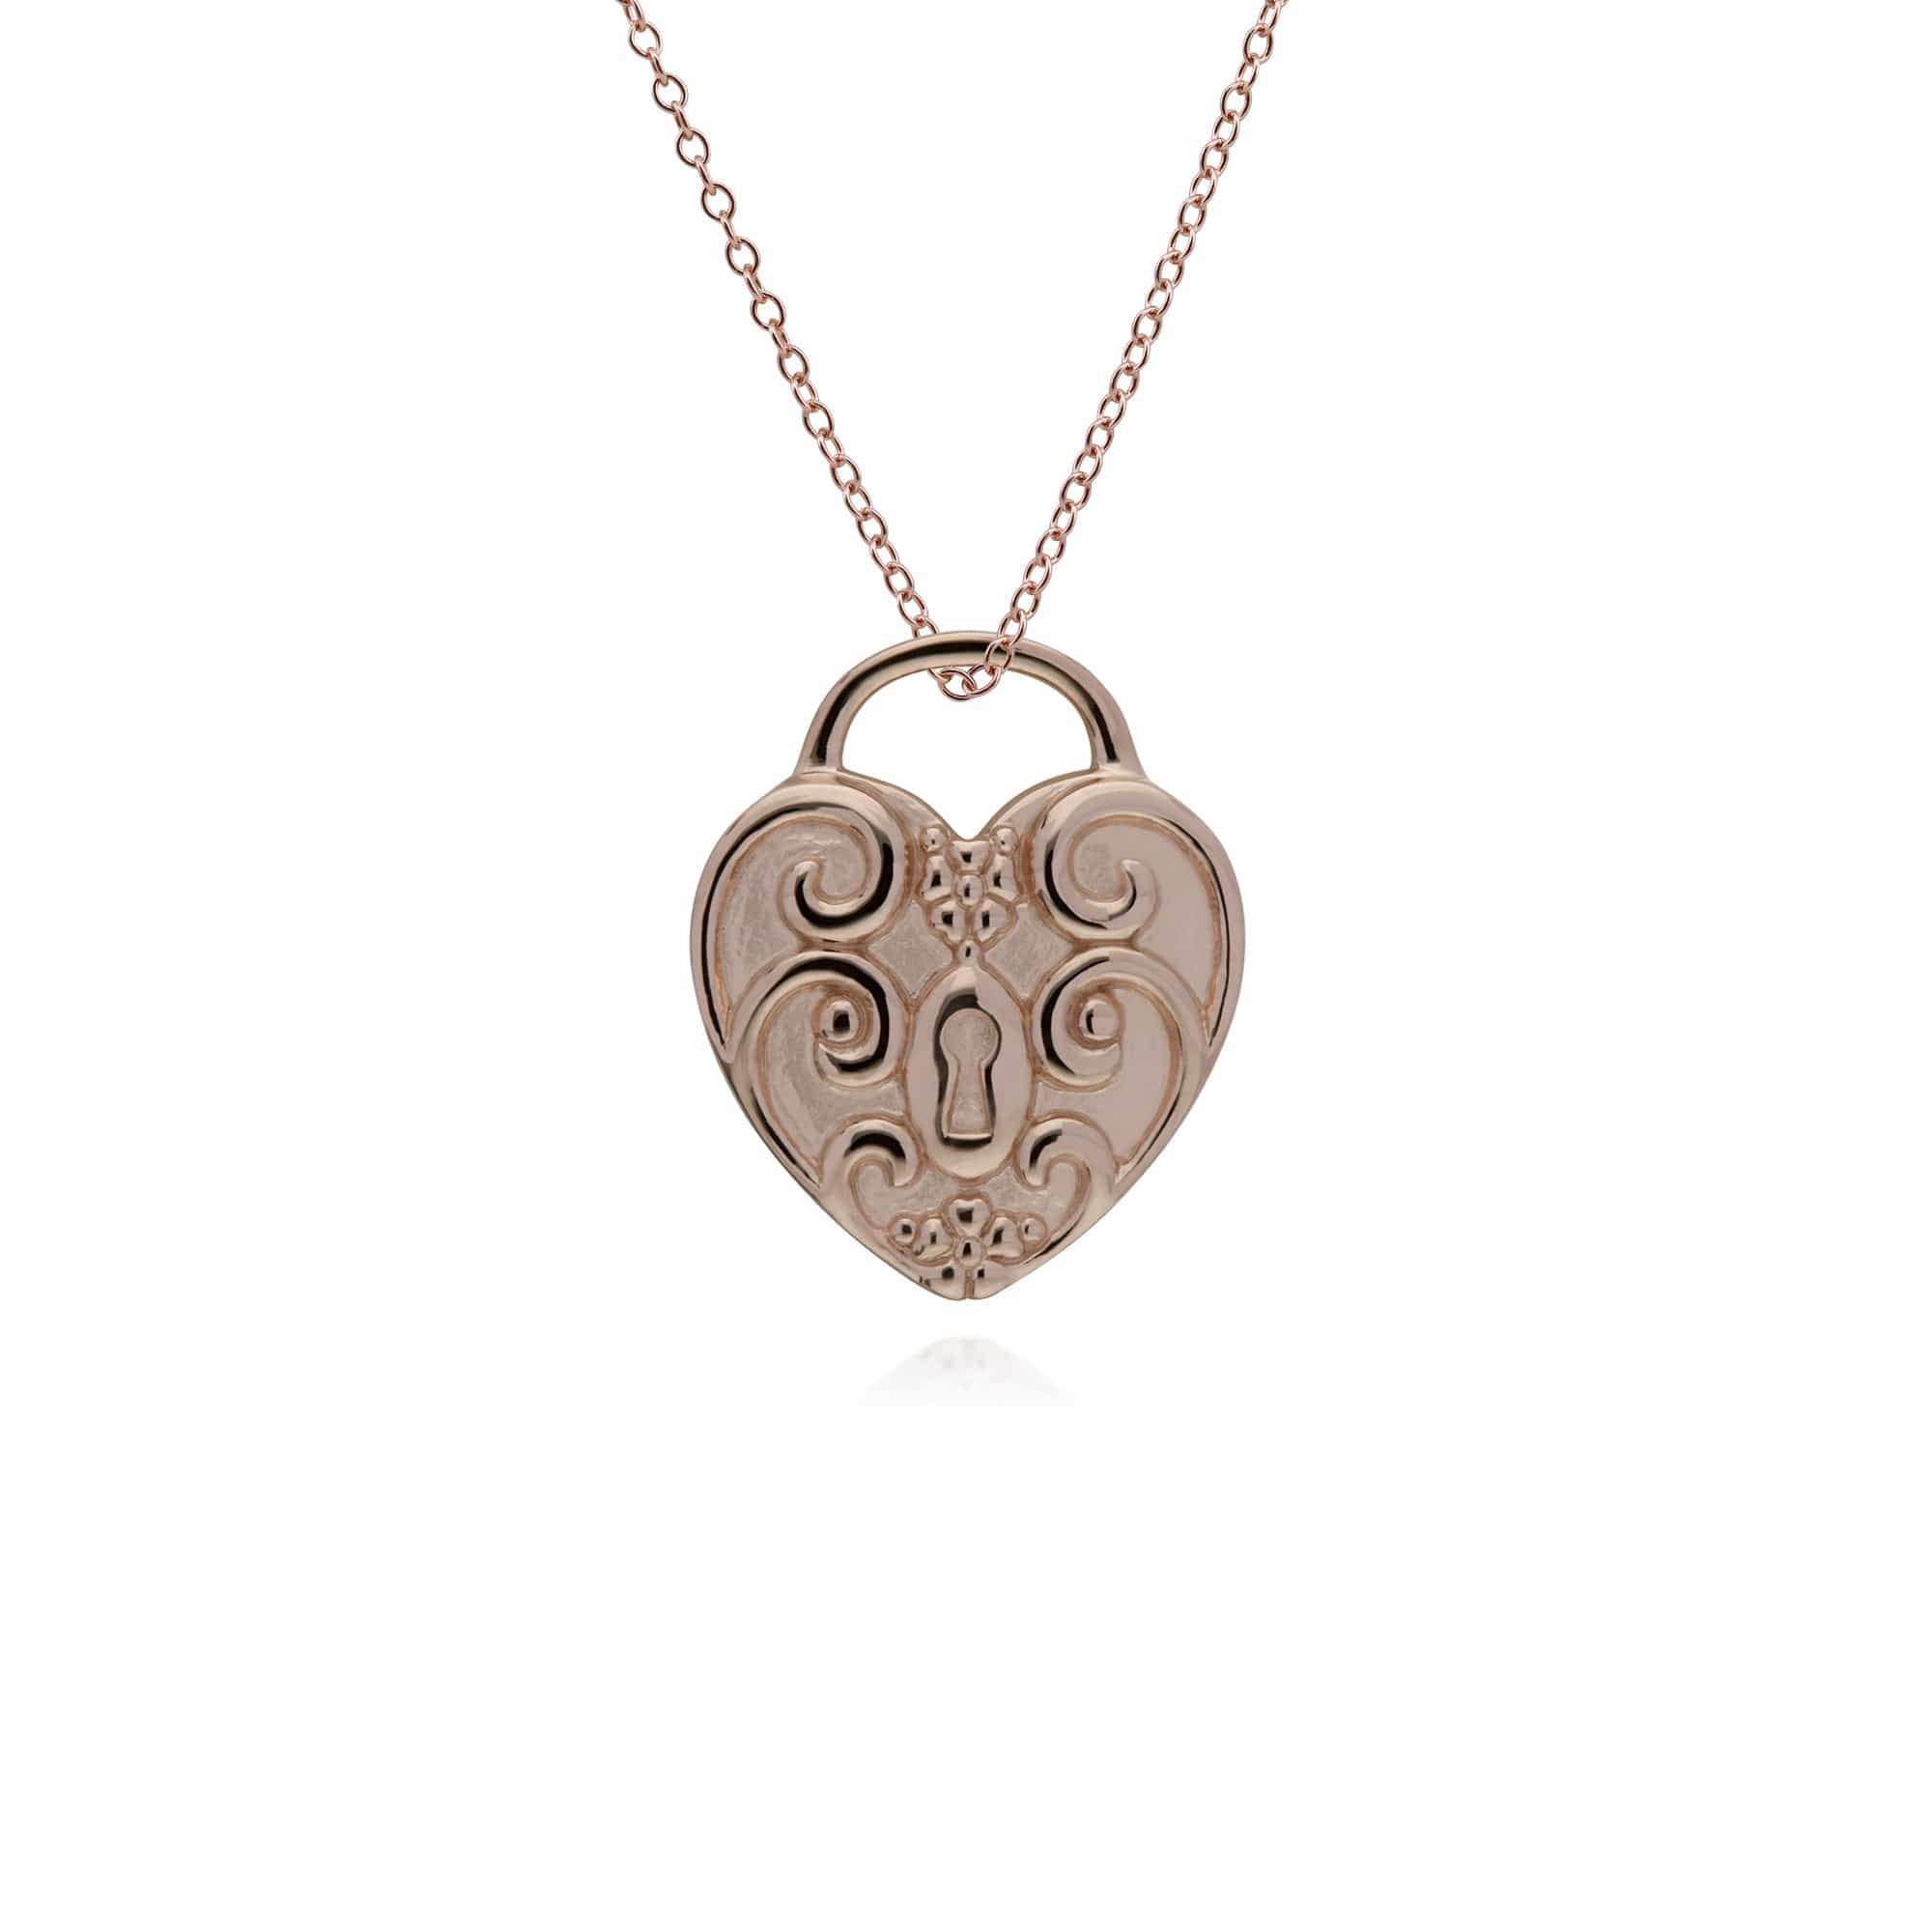 270P027305925-270P026501925 Classic Swirl Heart Lock Pendant & Peridot Charm in Rose Gold Plated 925 Sterling Silver 3